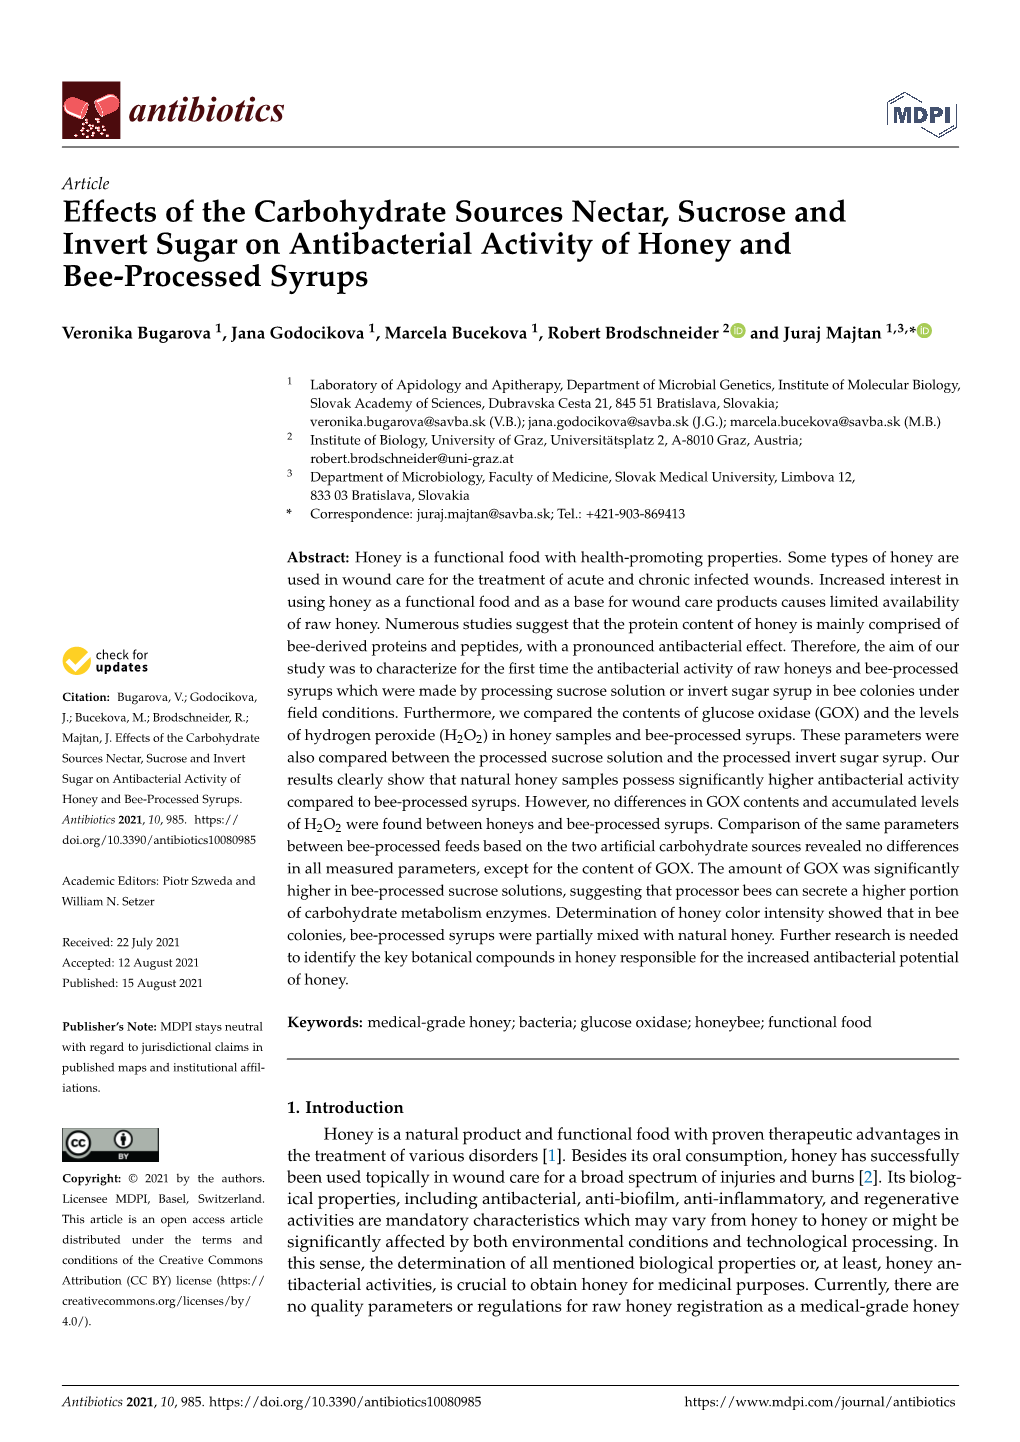 Effects of the Carbohydrate Sources Nectar, Sucrose and Invert Sugar on Antibacterial Activity of Honey and Bee-Processed Syrups